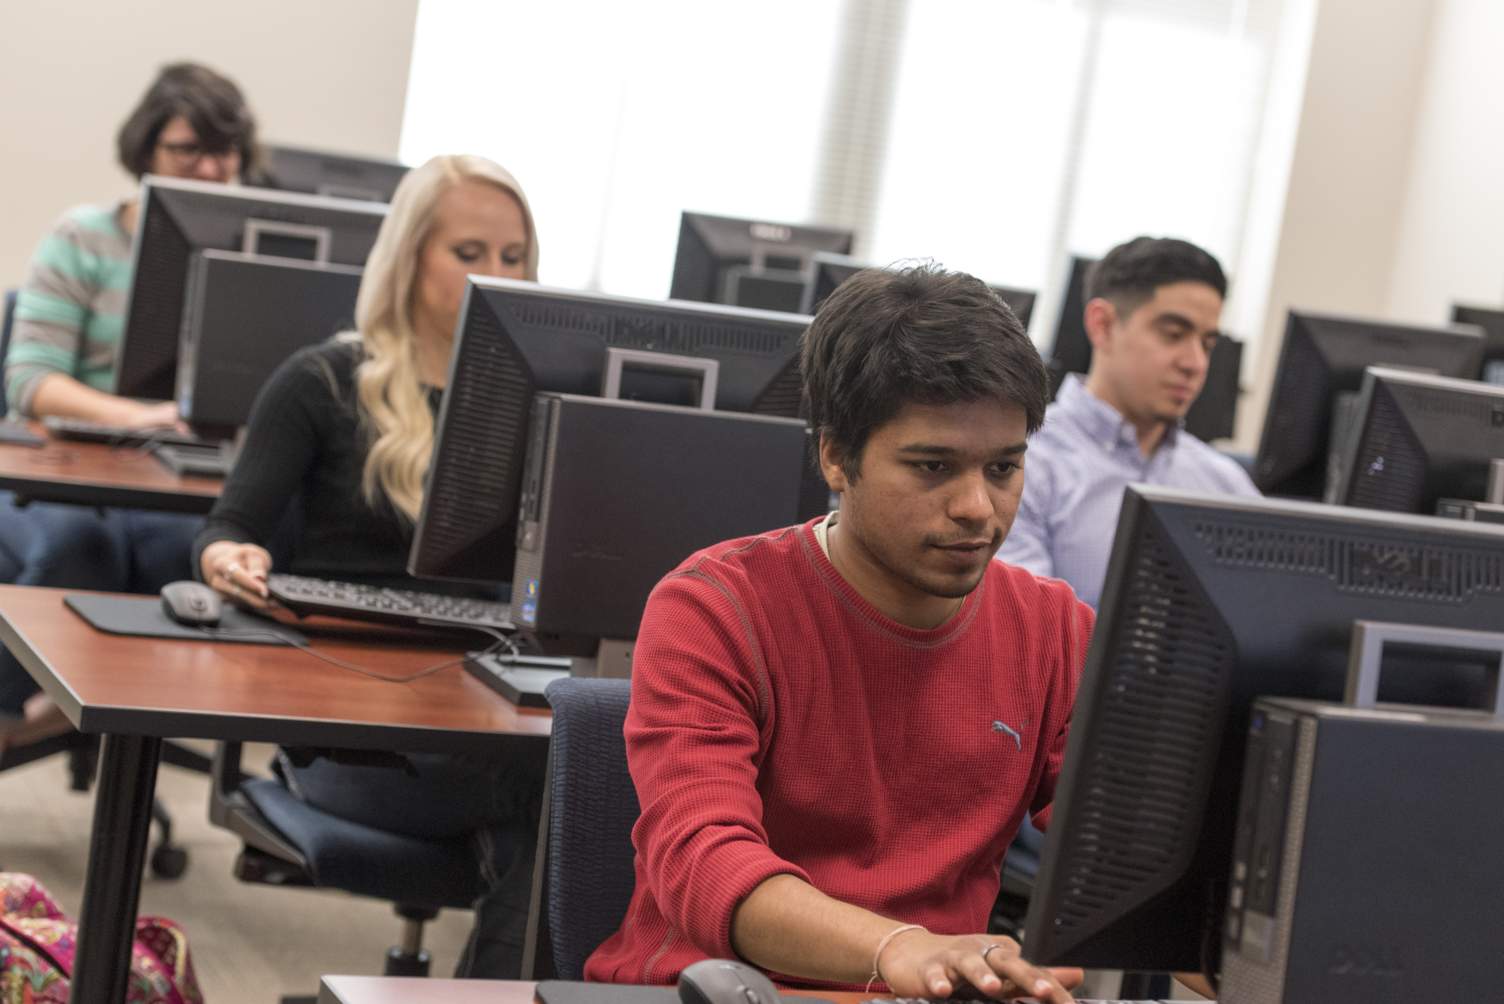 A photo of students using the computer lab